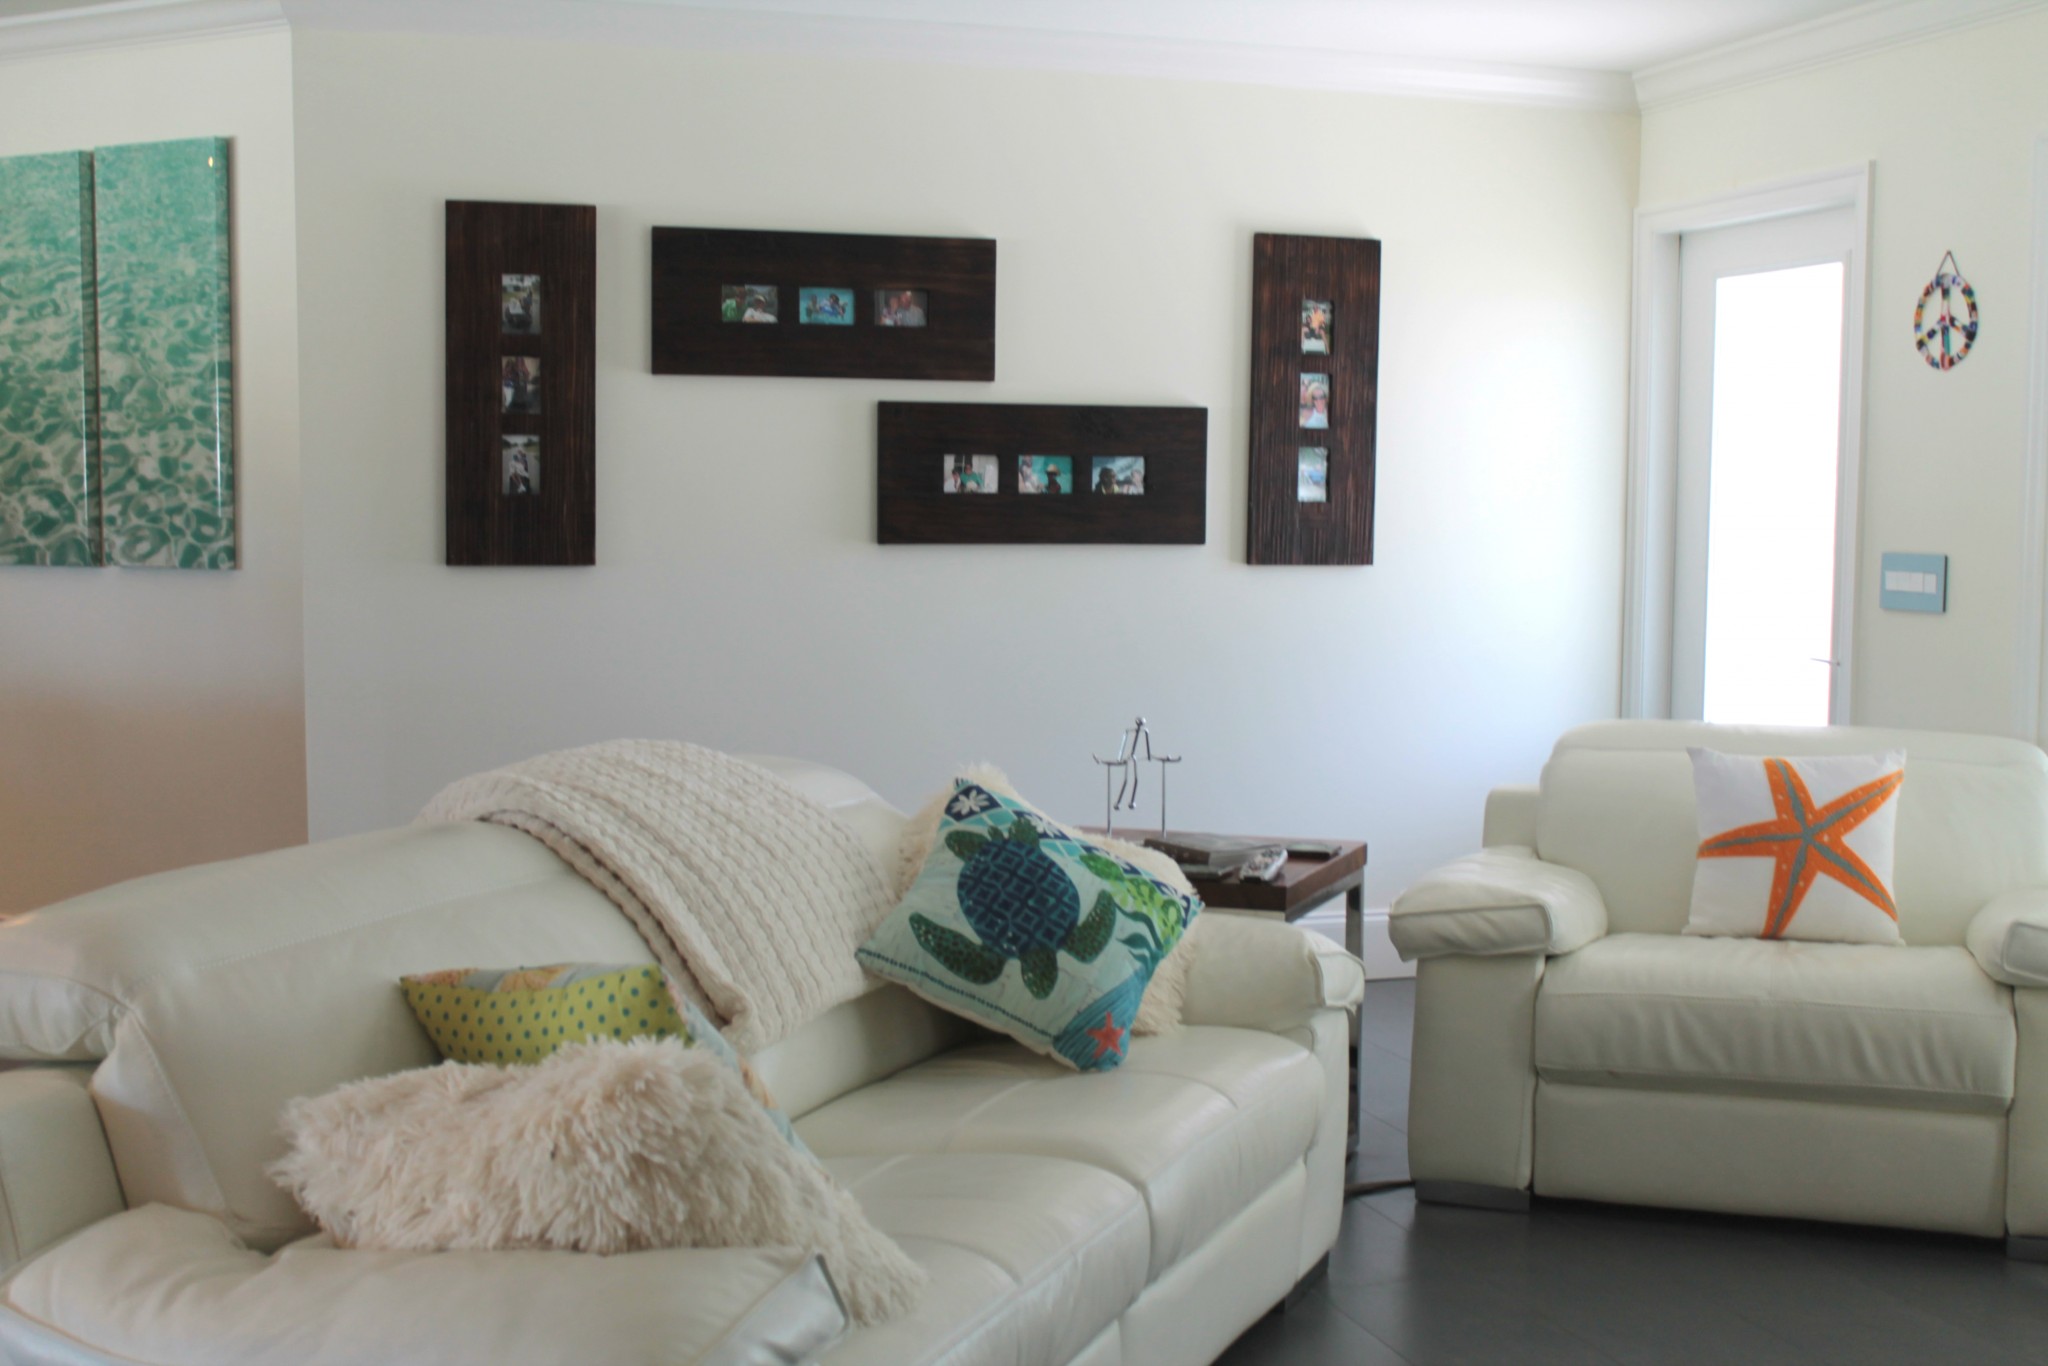 Creative ways to display family photo frames in the living room.